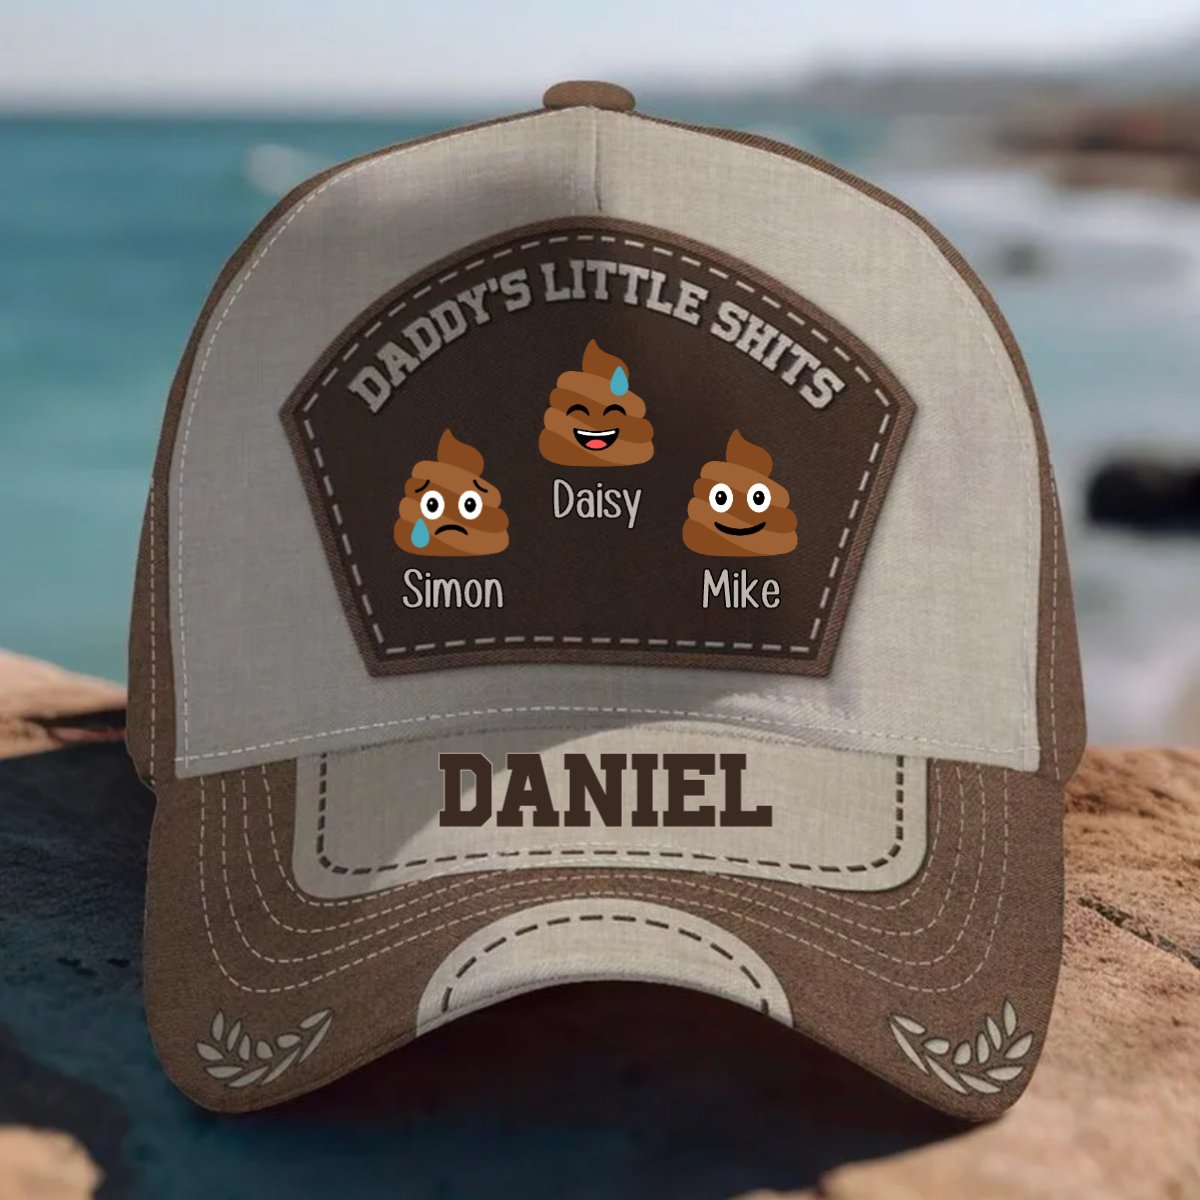 Father - Daddy's Little Sh*ts - Personalized Classic Cap (LH) - The Next Custom Gift